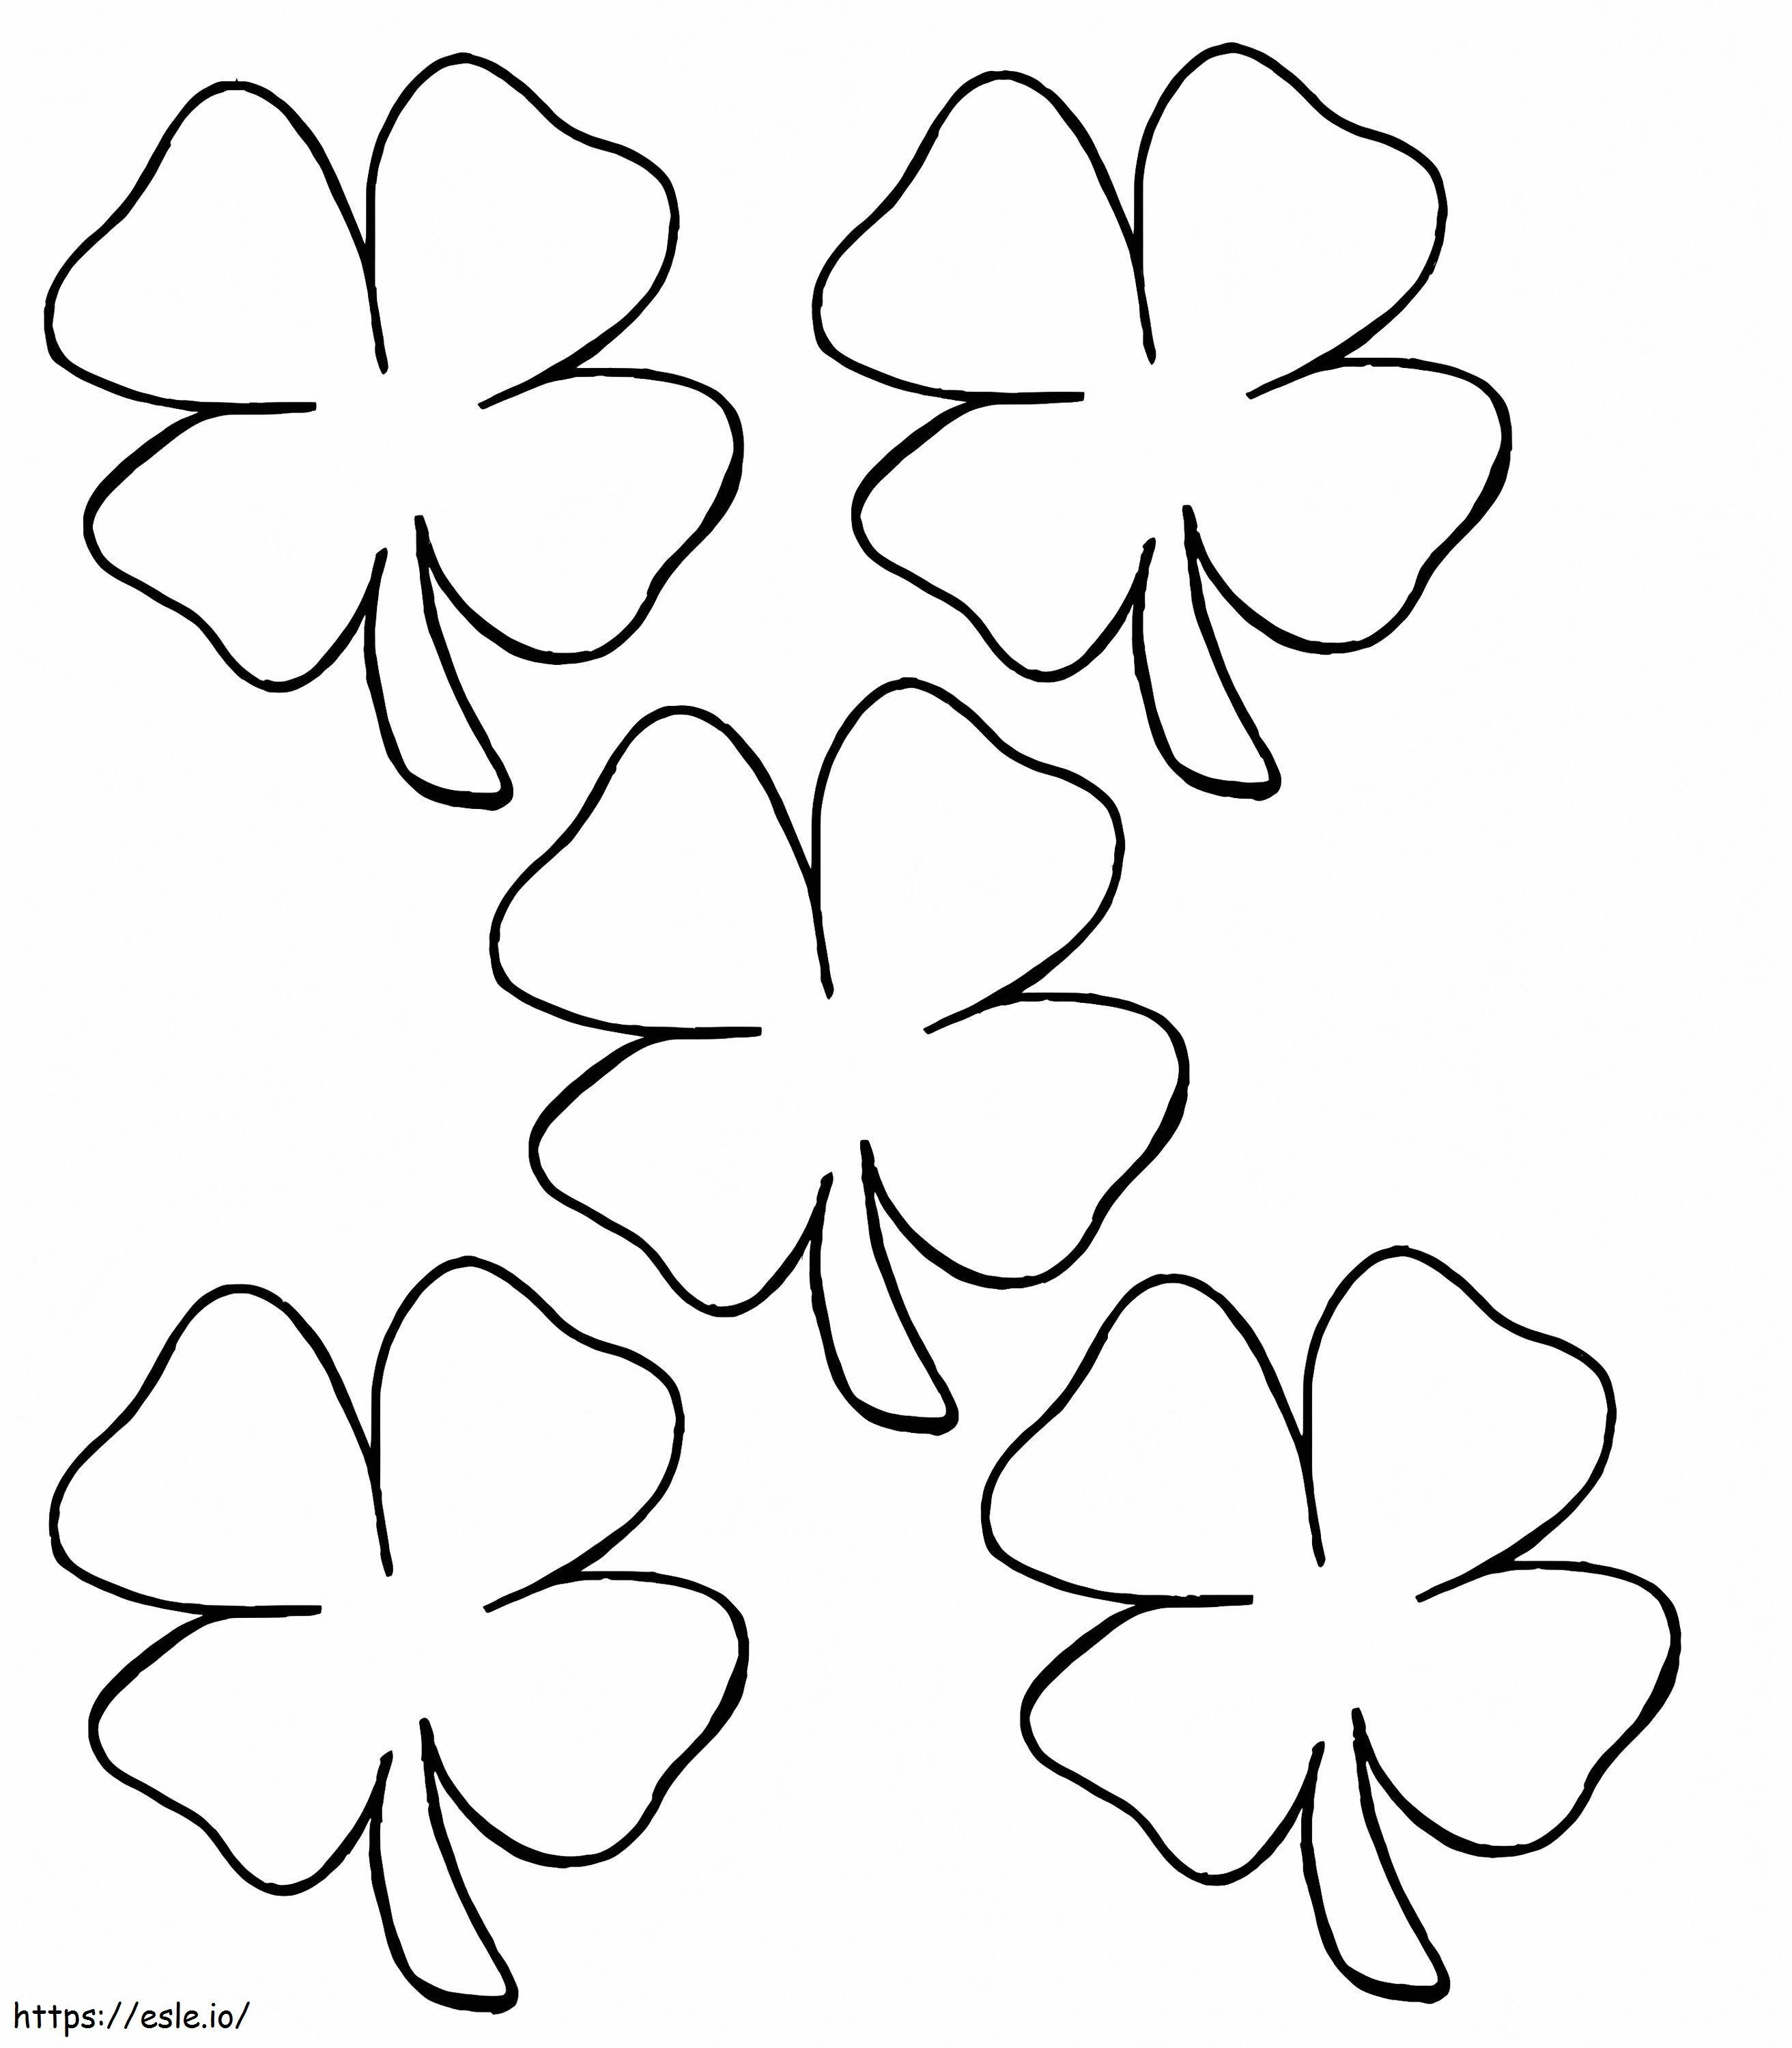 Five Clubs 1 coloring page